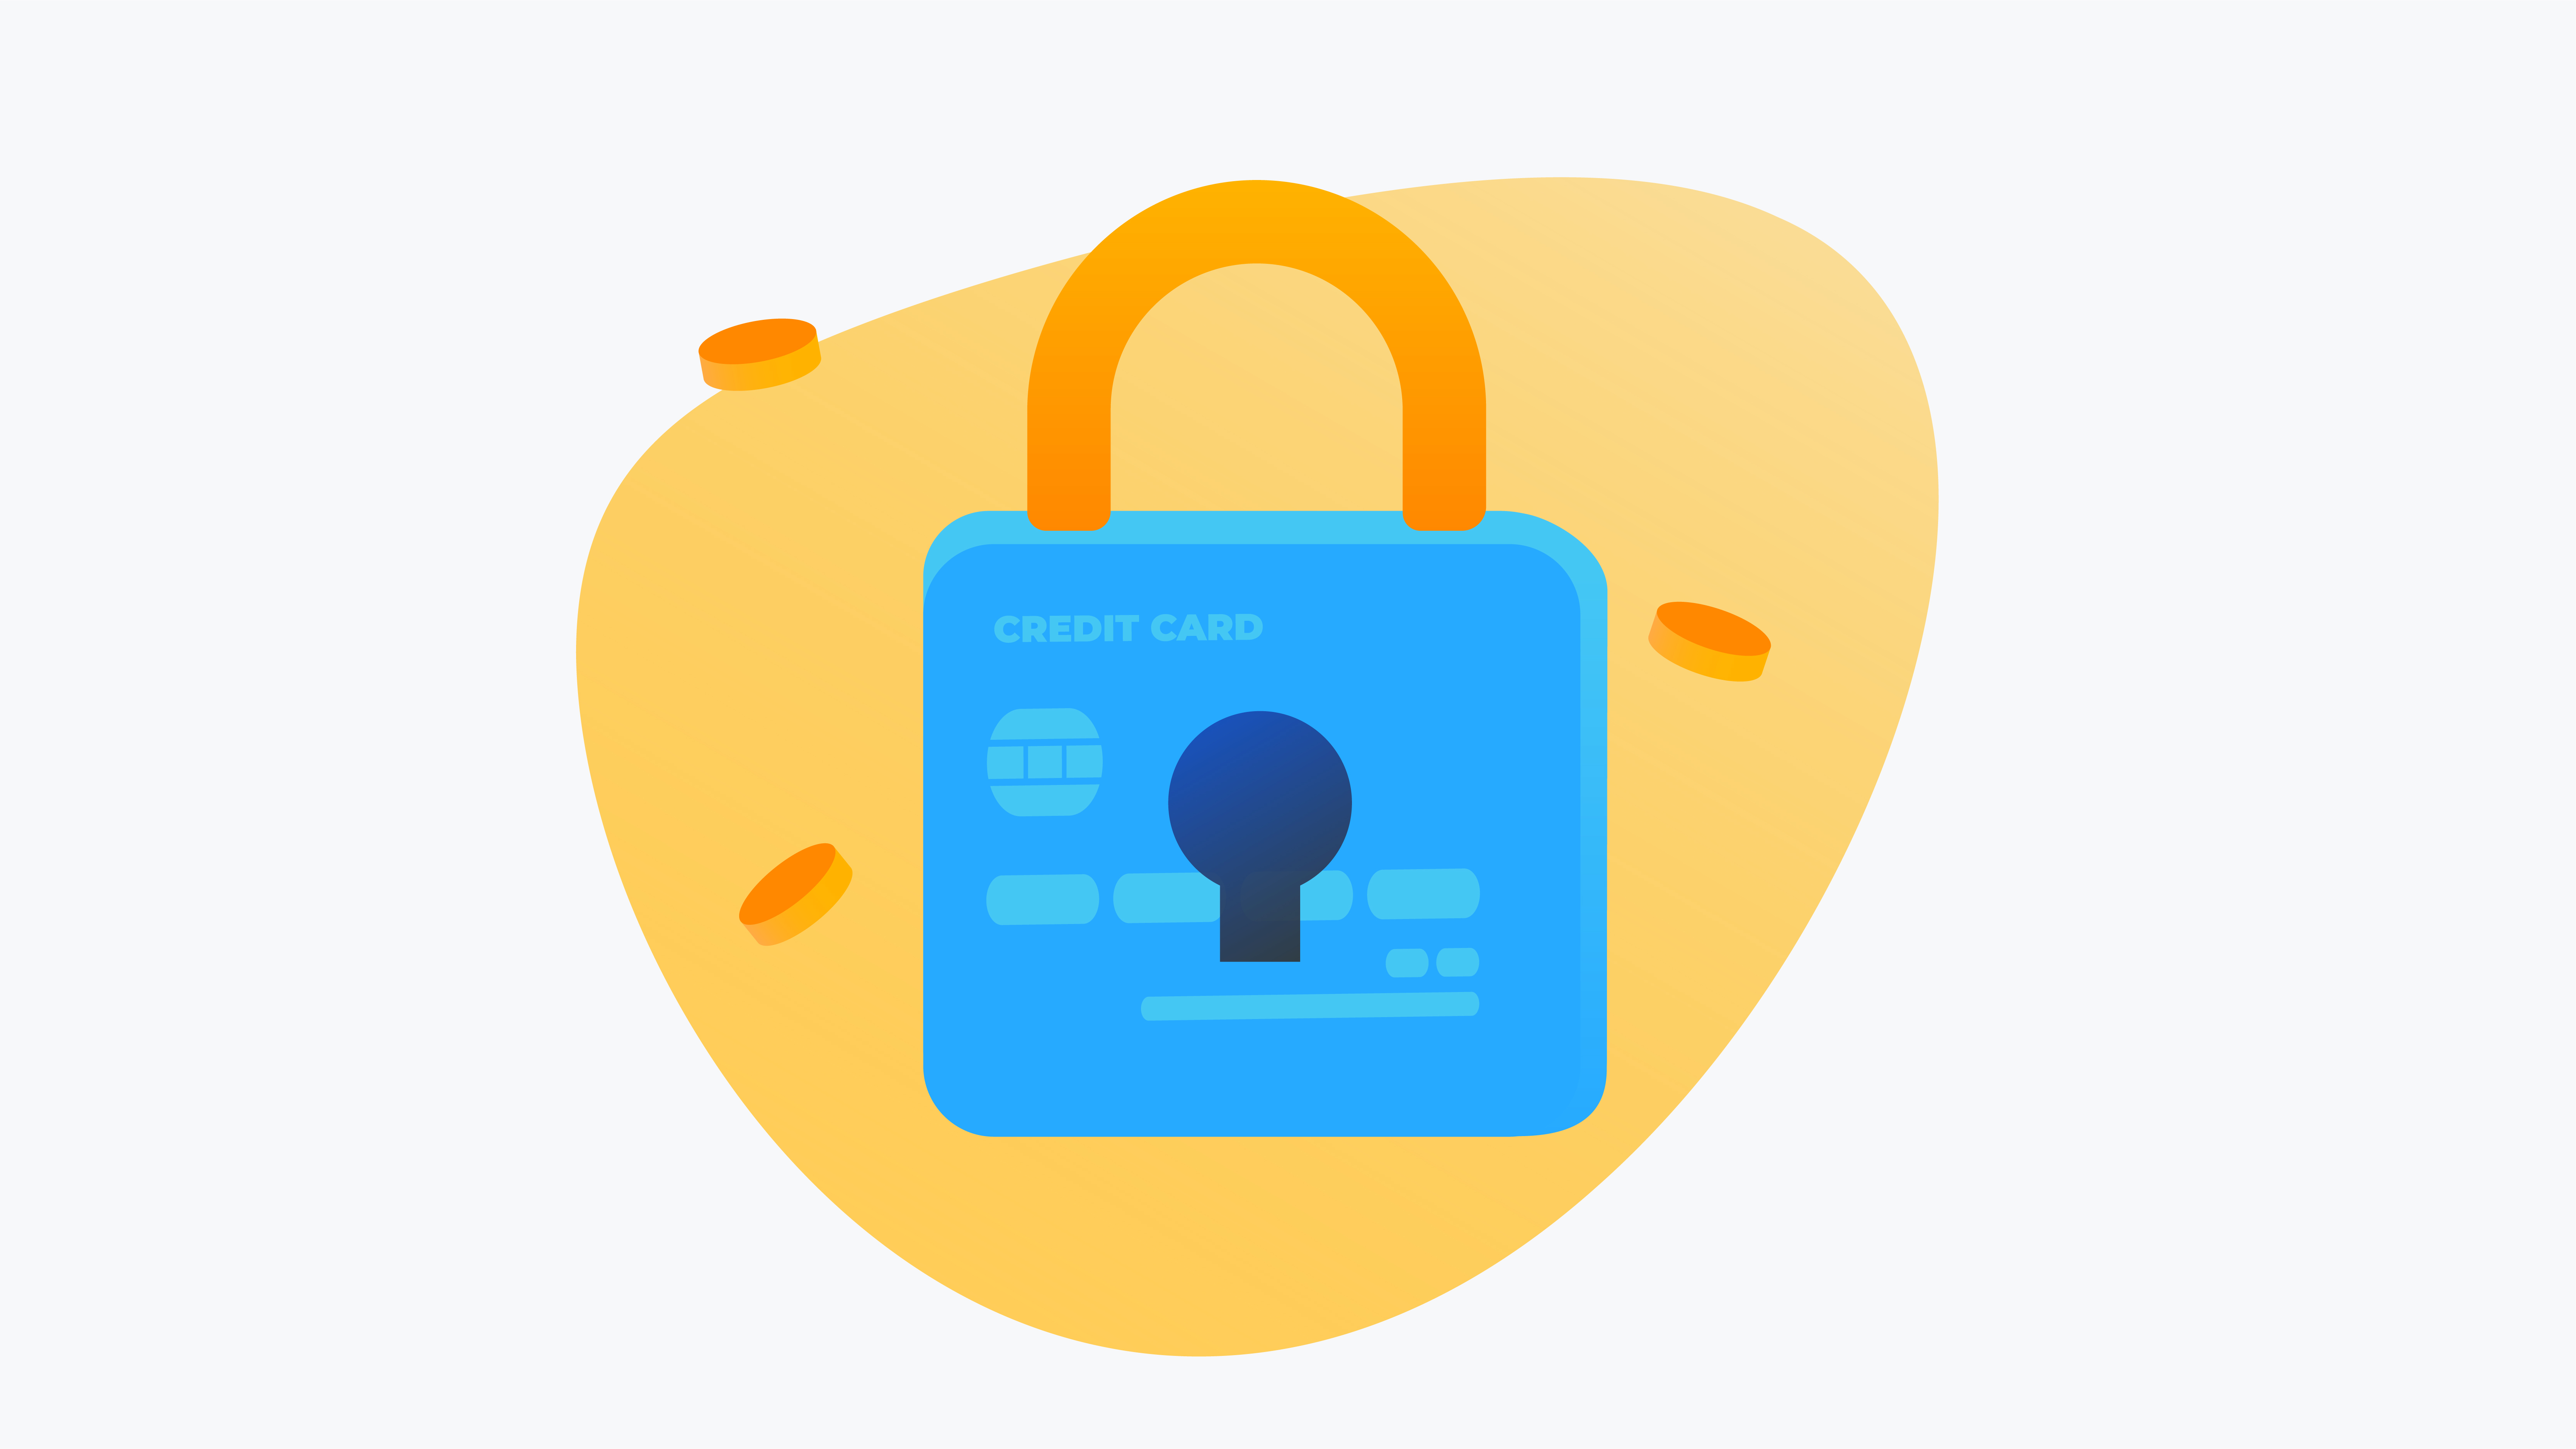 Lock over a credit card